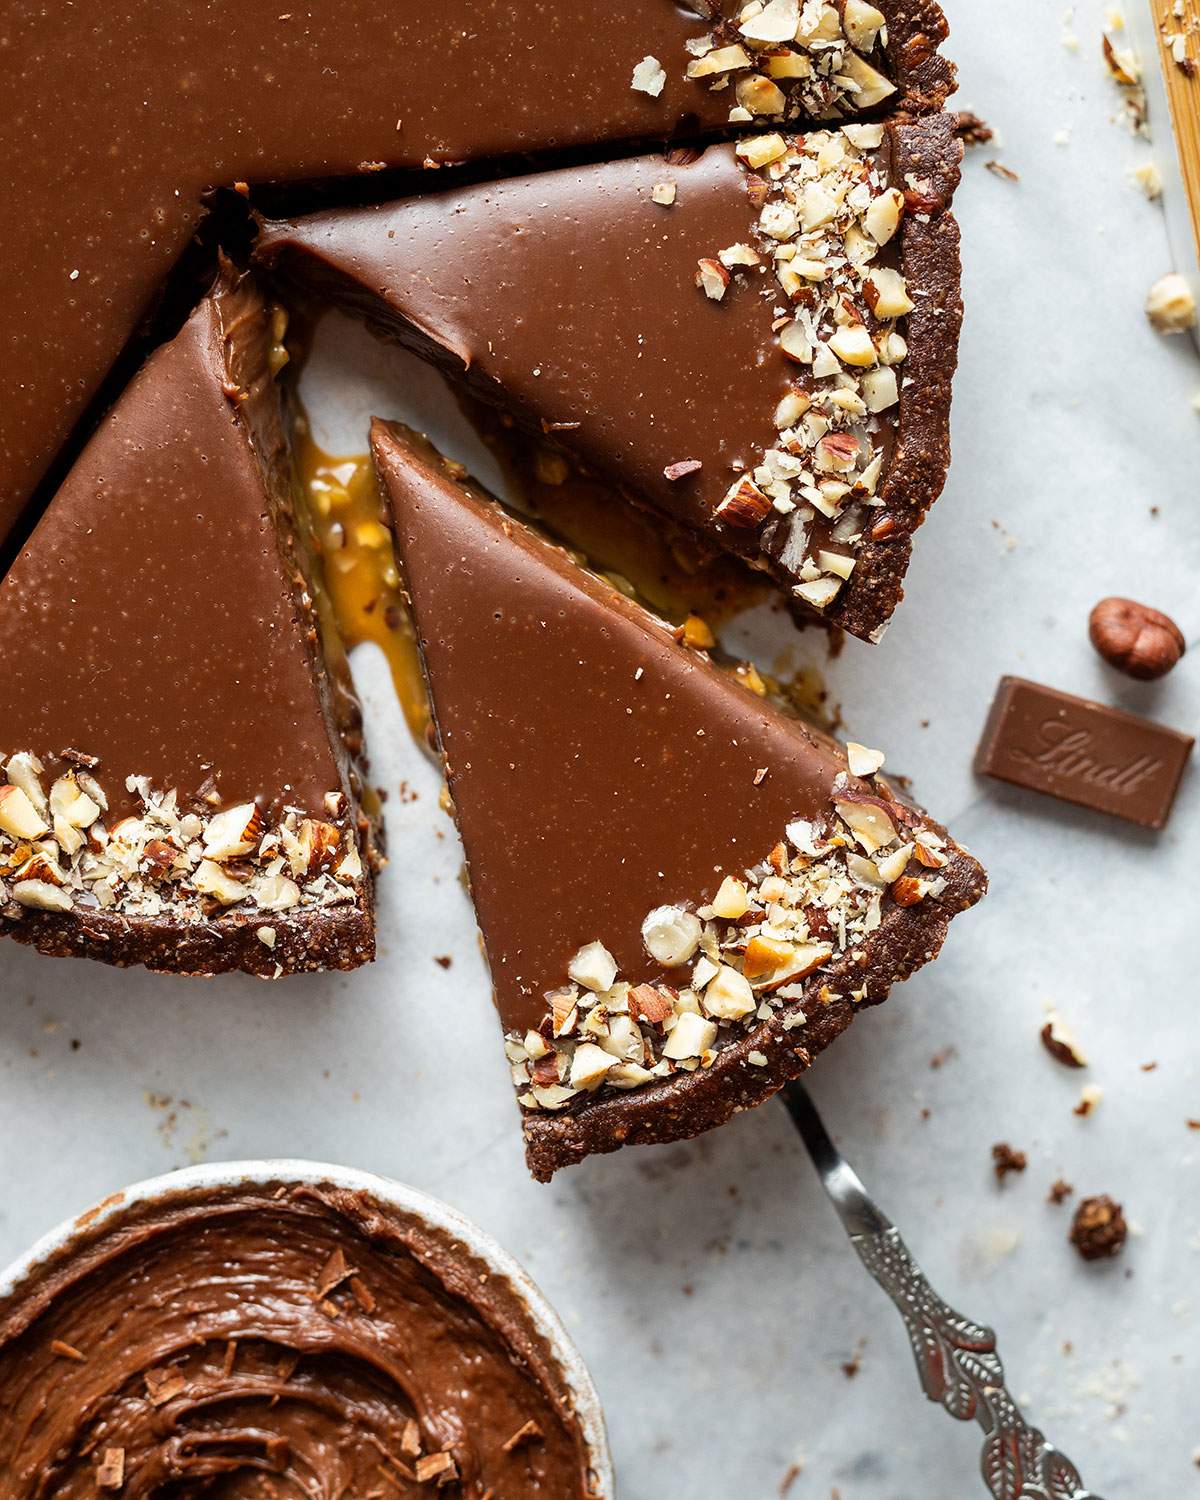 Sliced vegan chocolate tart from above with one slice pulled from the tart, showing the caramel sauce.